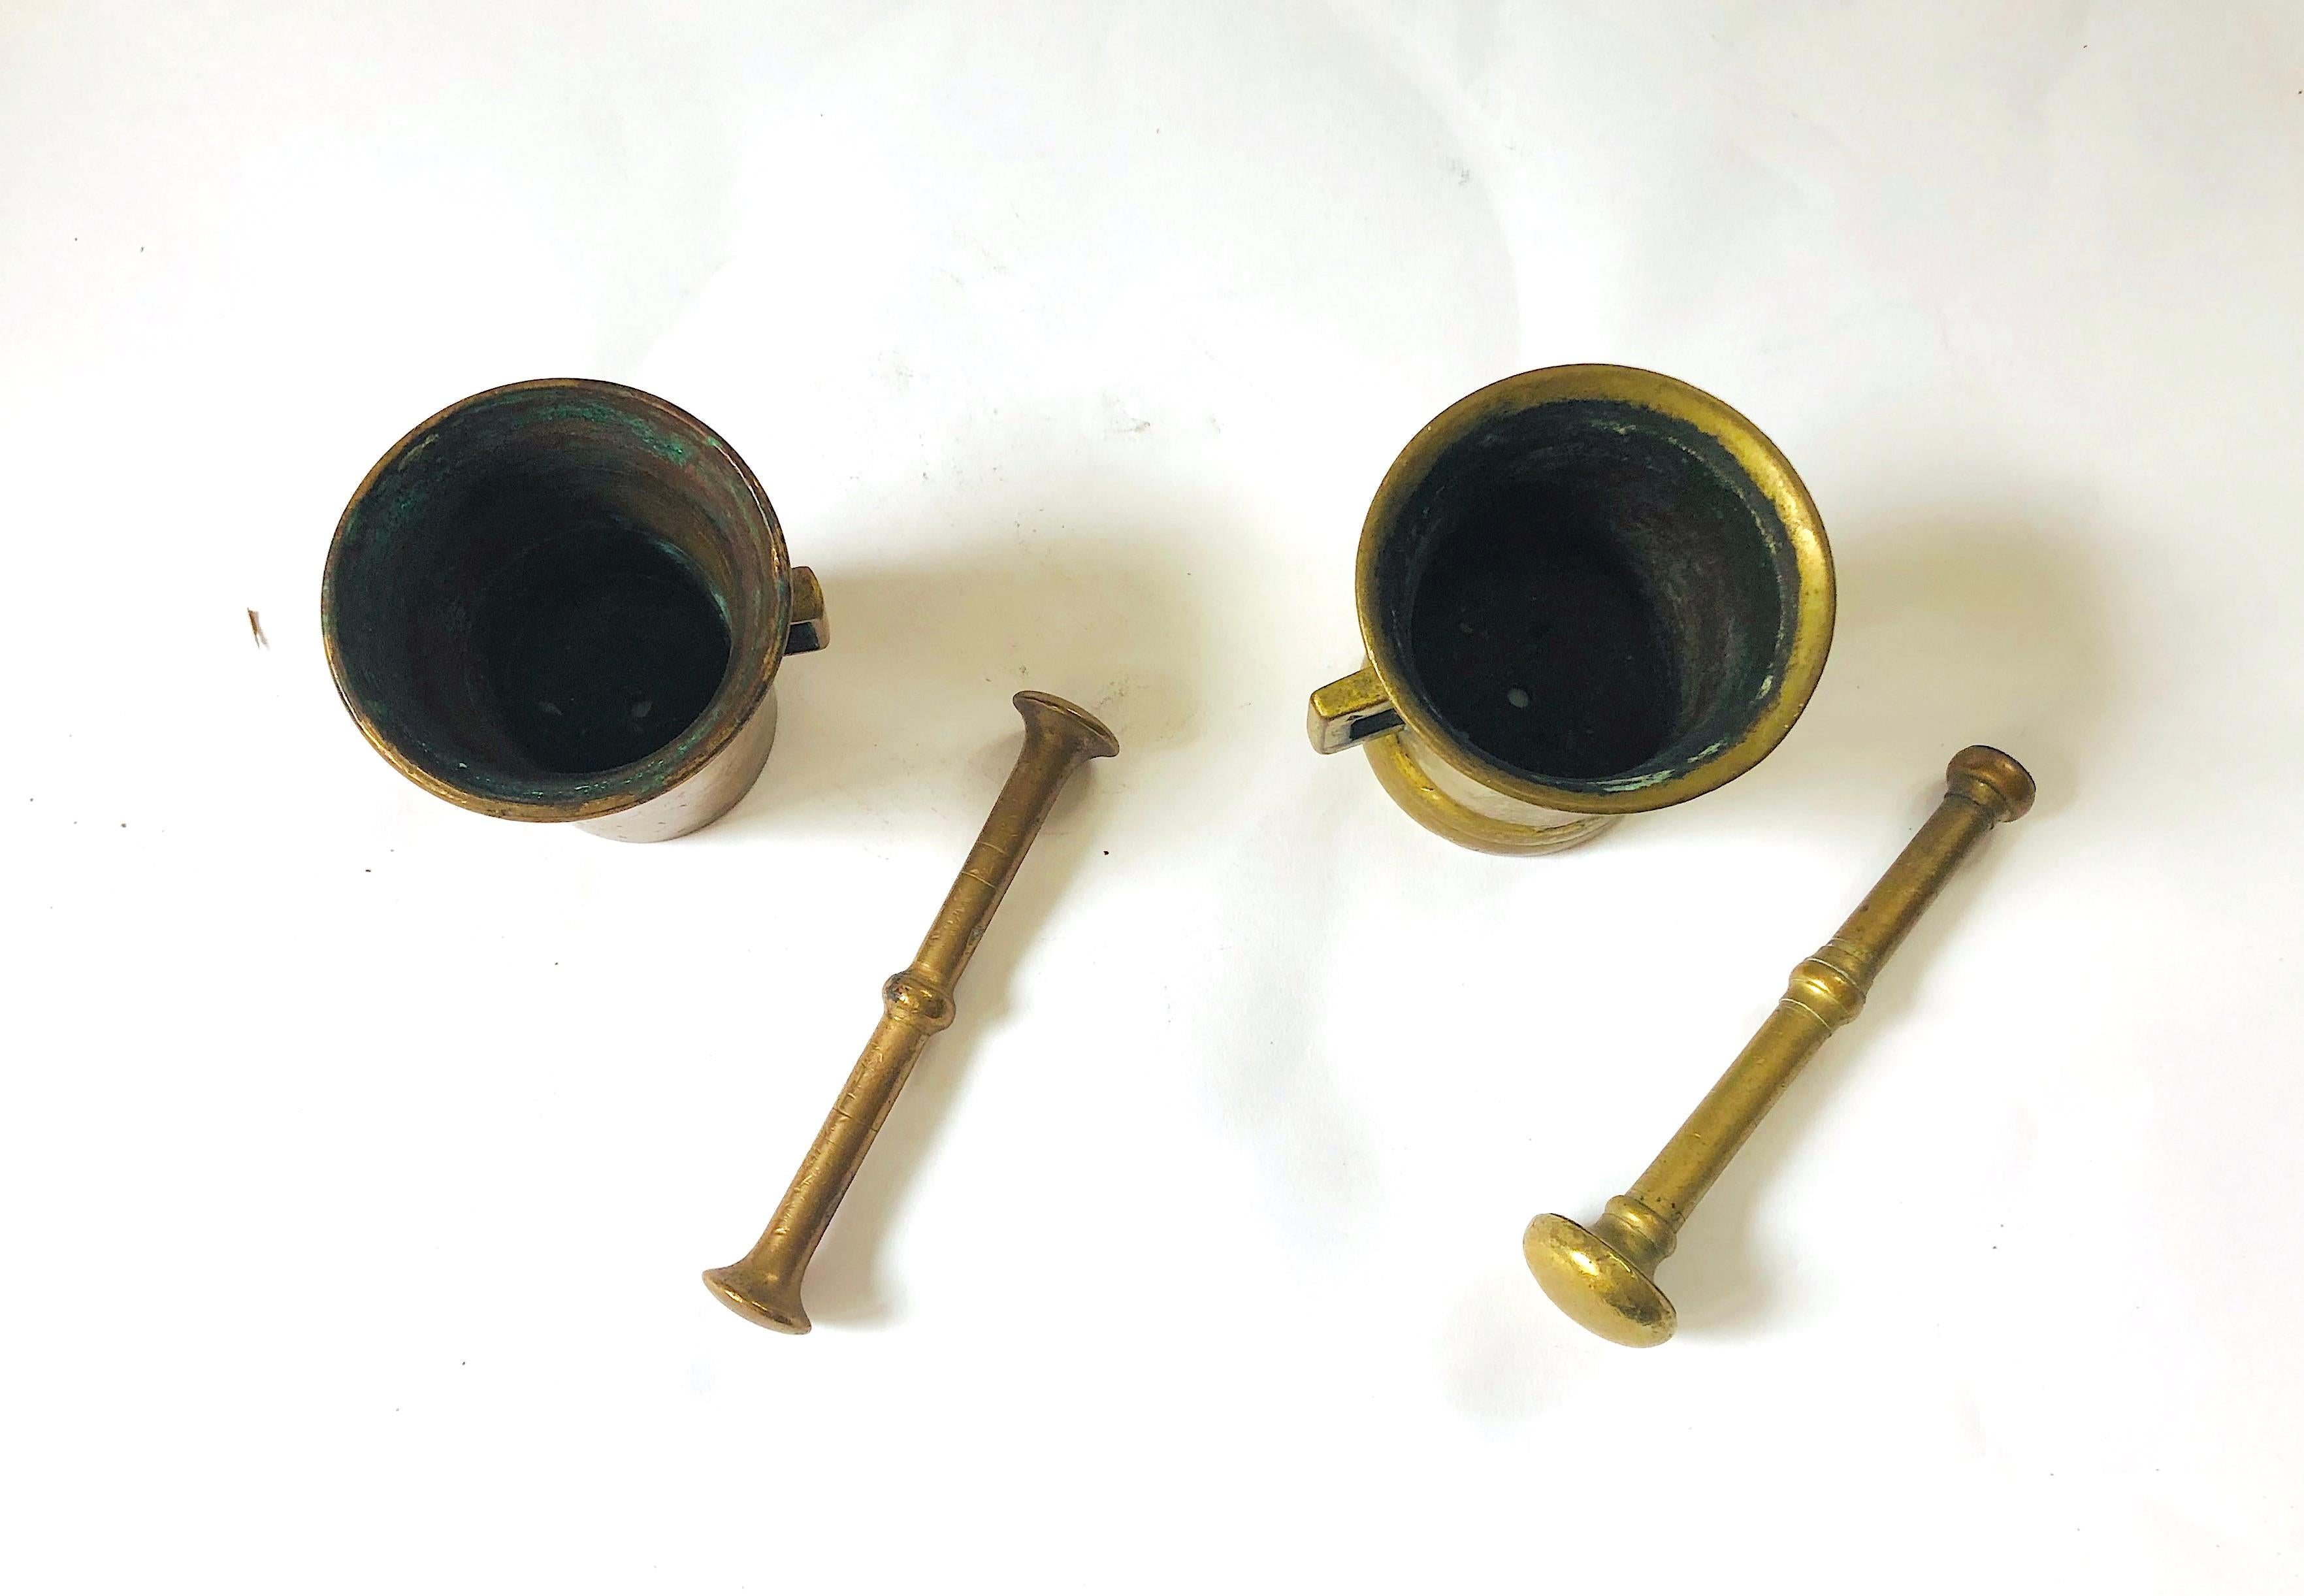 Set of 2 very cool heavy brass (?) antique mortar and pestles. Actually one may be brass and one copper, judging from the green aging tinge inside. They are not a matched set but very similar in size and shape, both with handles. 

Lovely as decor.